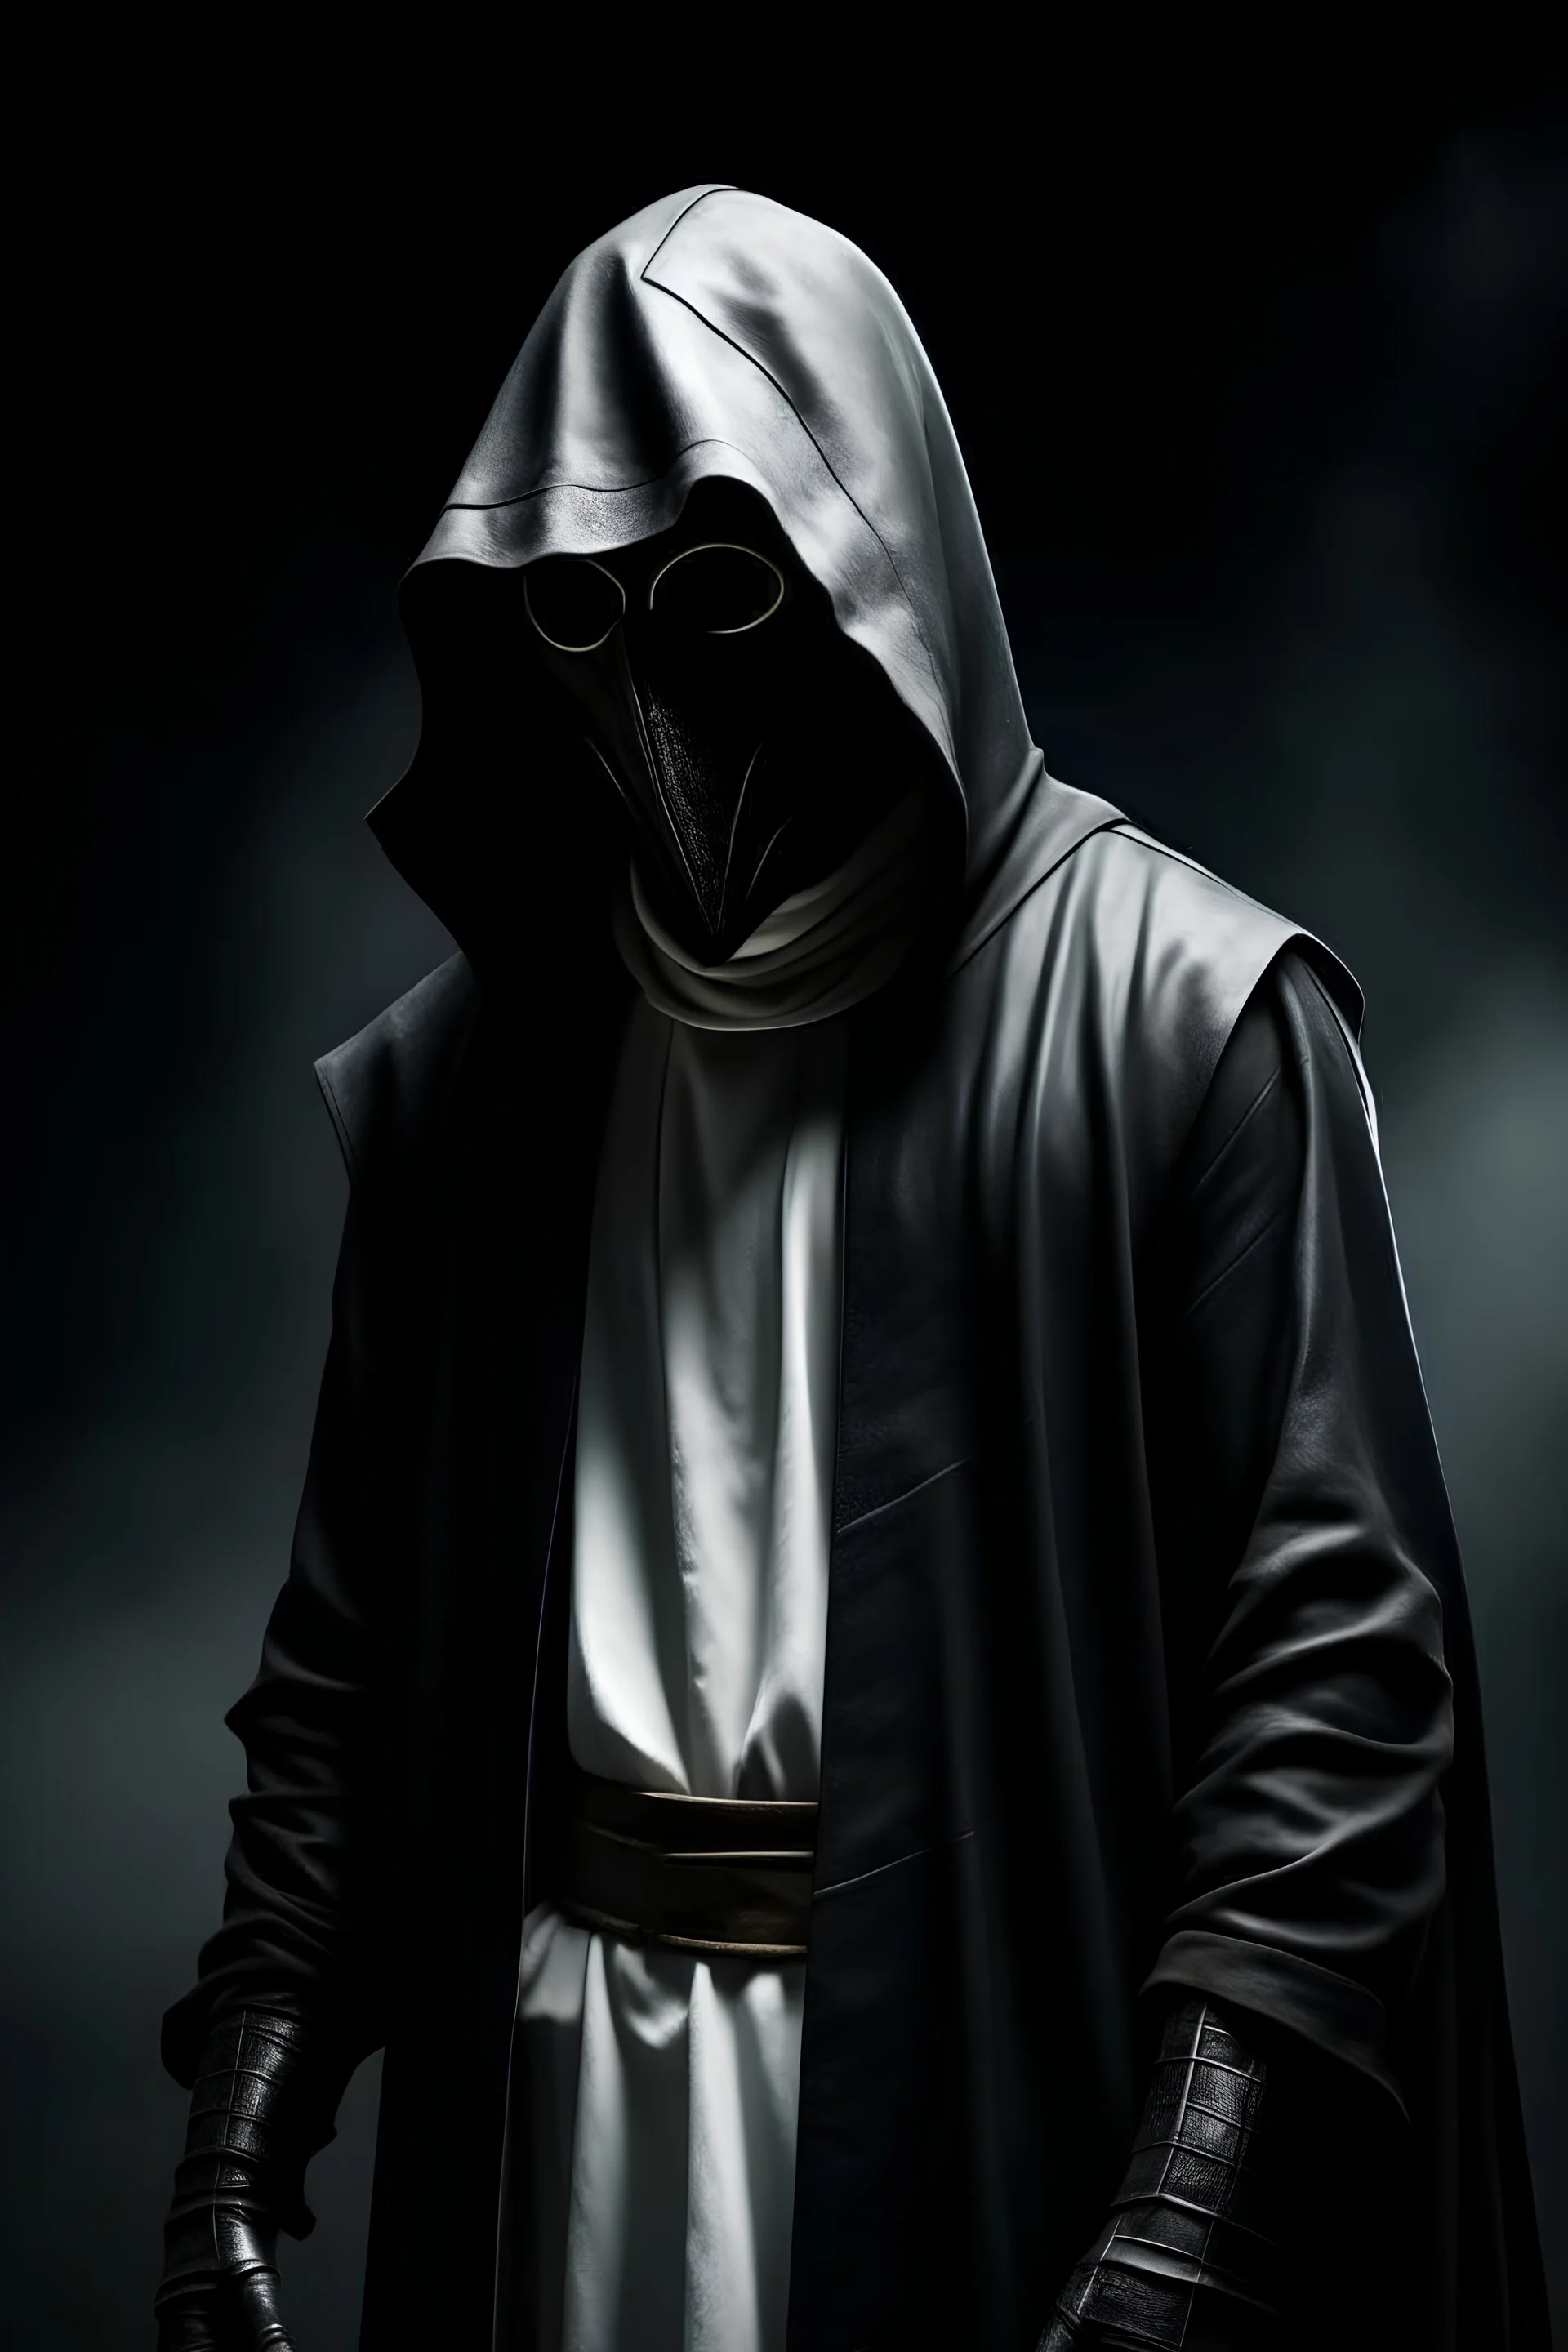 a mysterious stranger wearing a full face black mask, white hooded cloak and leather armor, full body